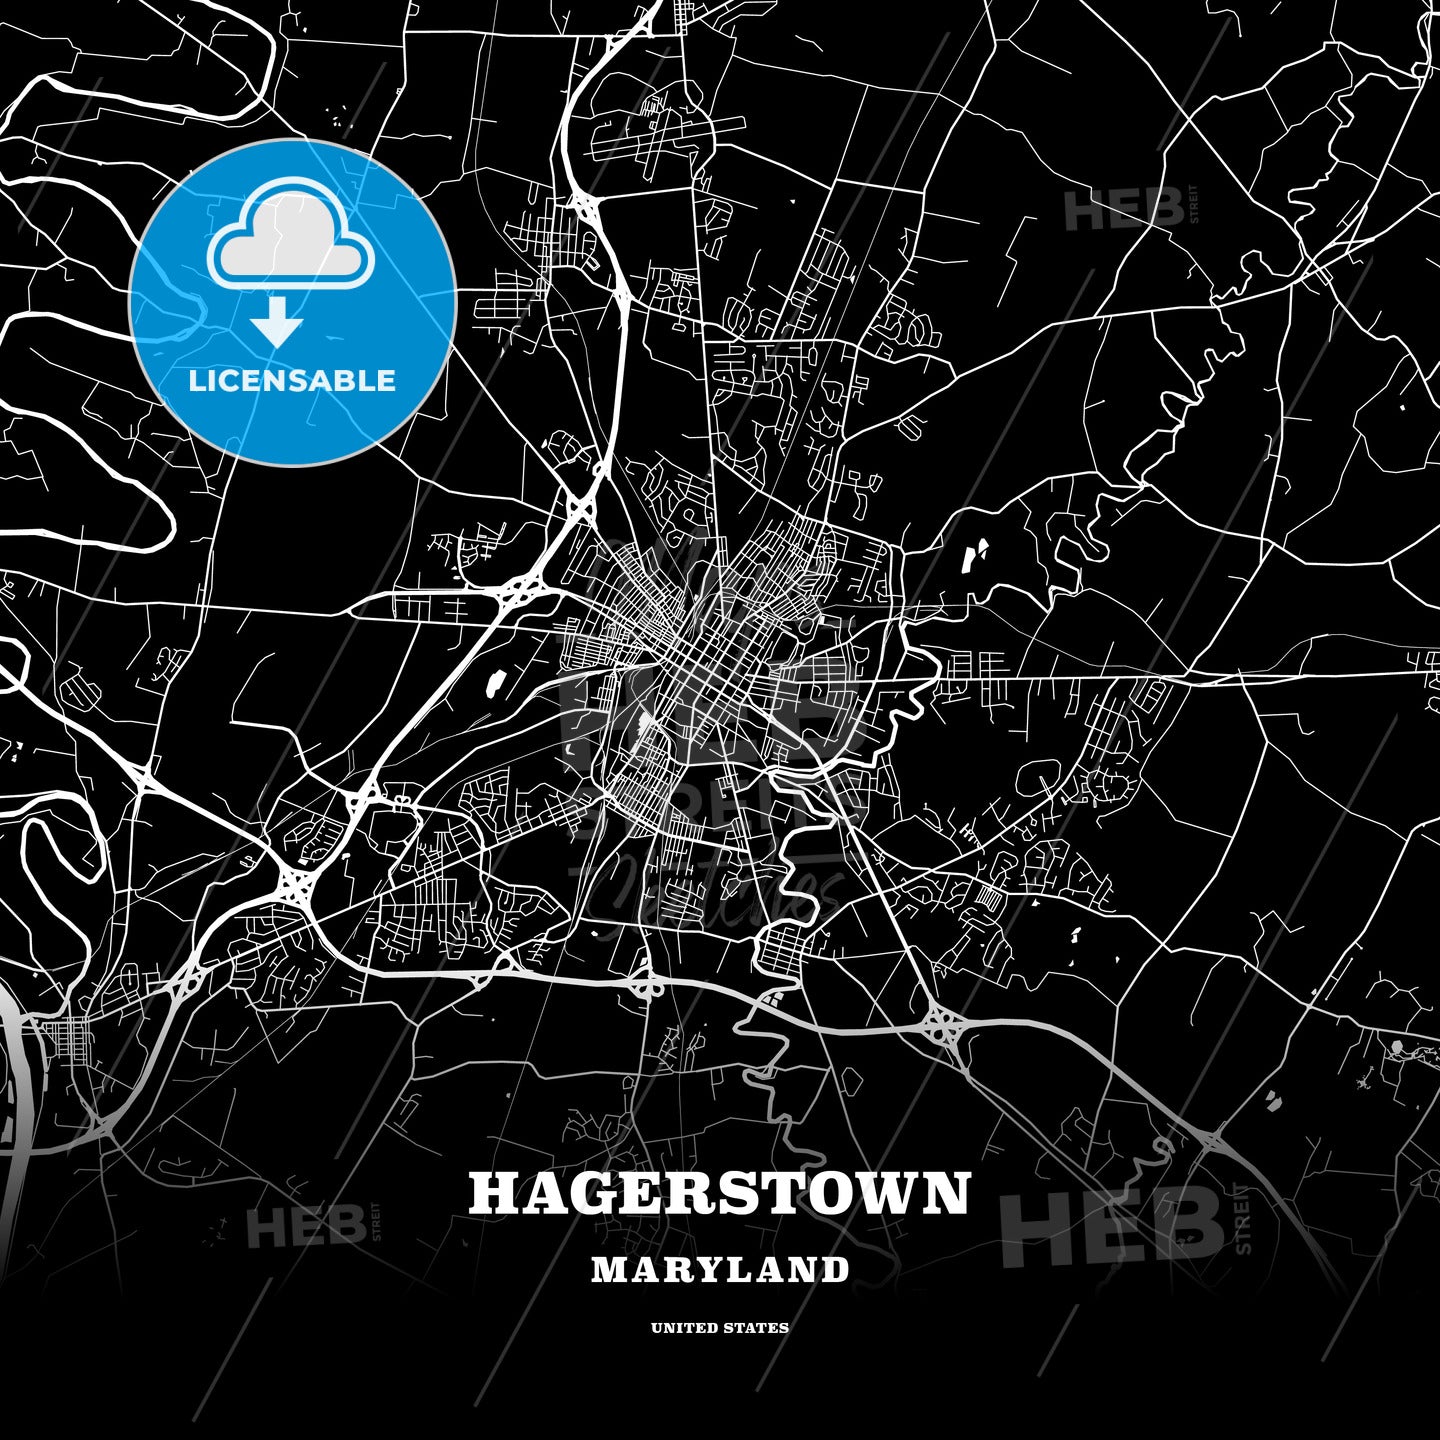 Hagerstown, Maryland, USA map